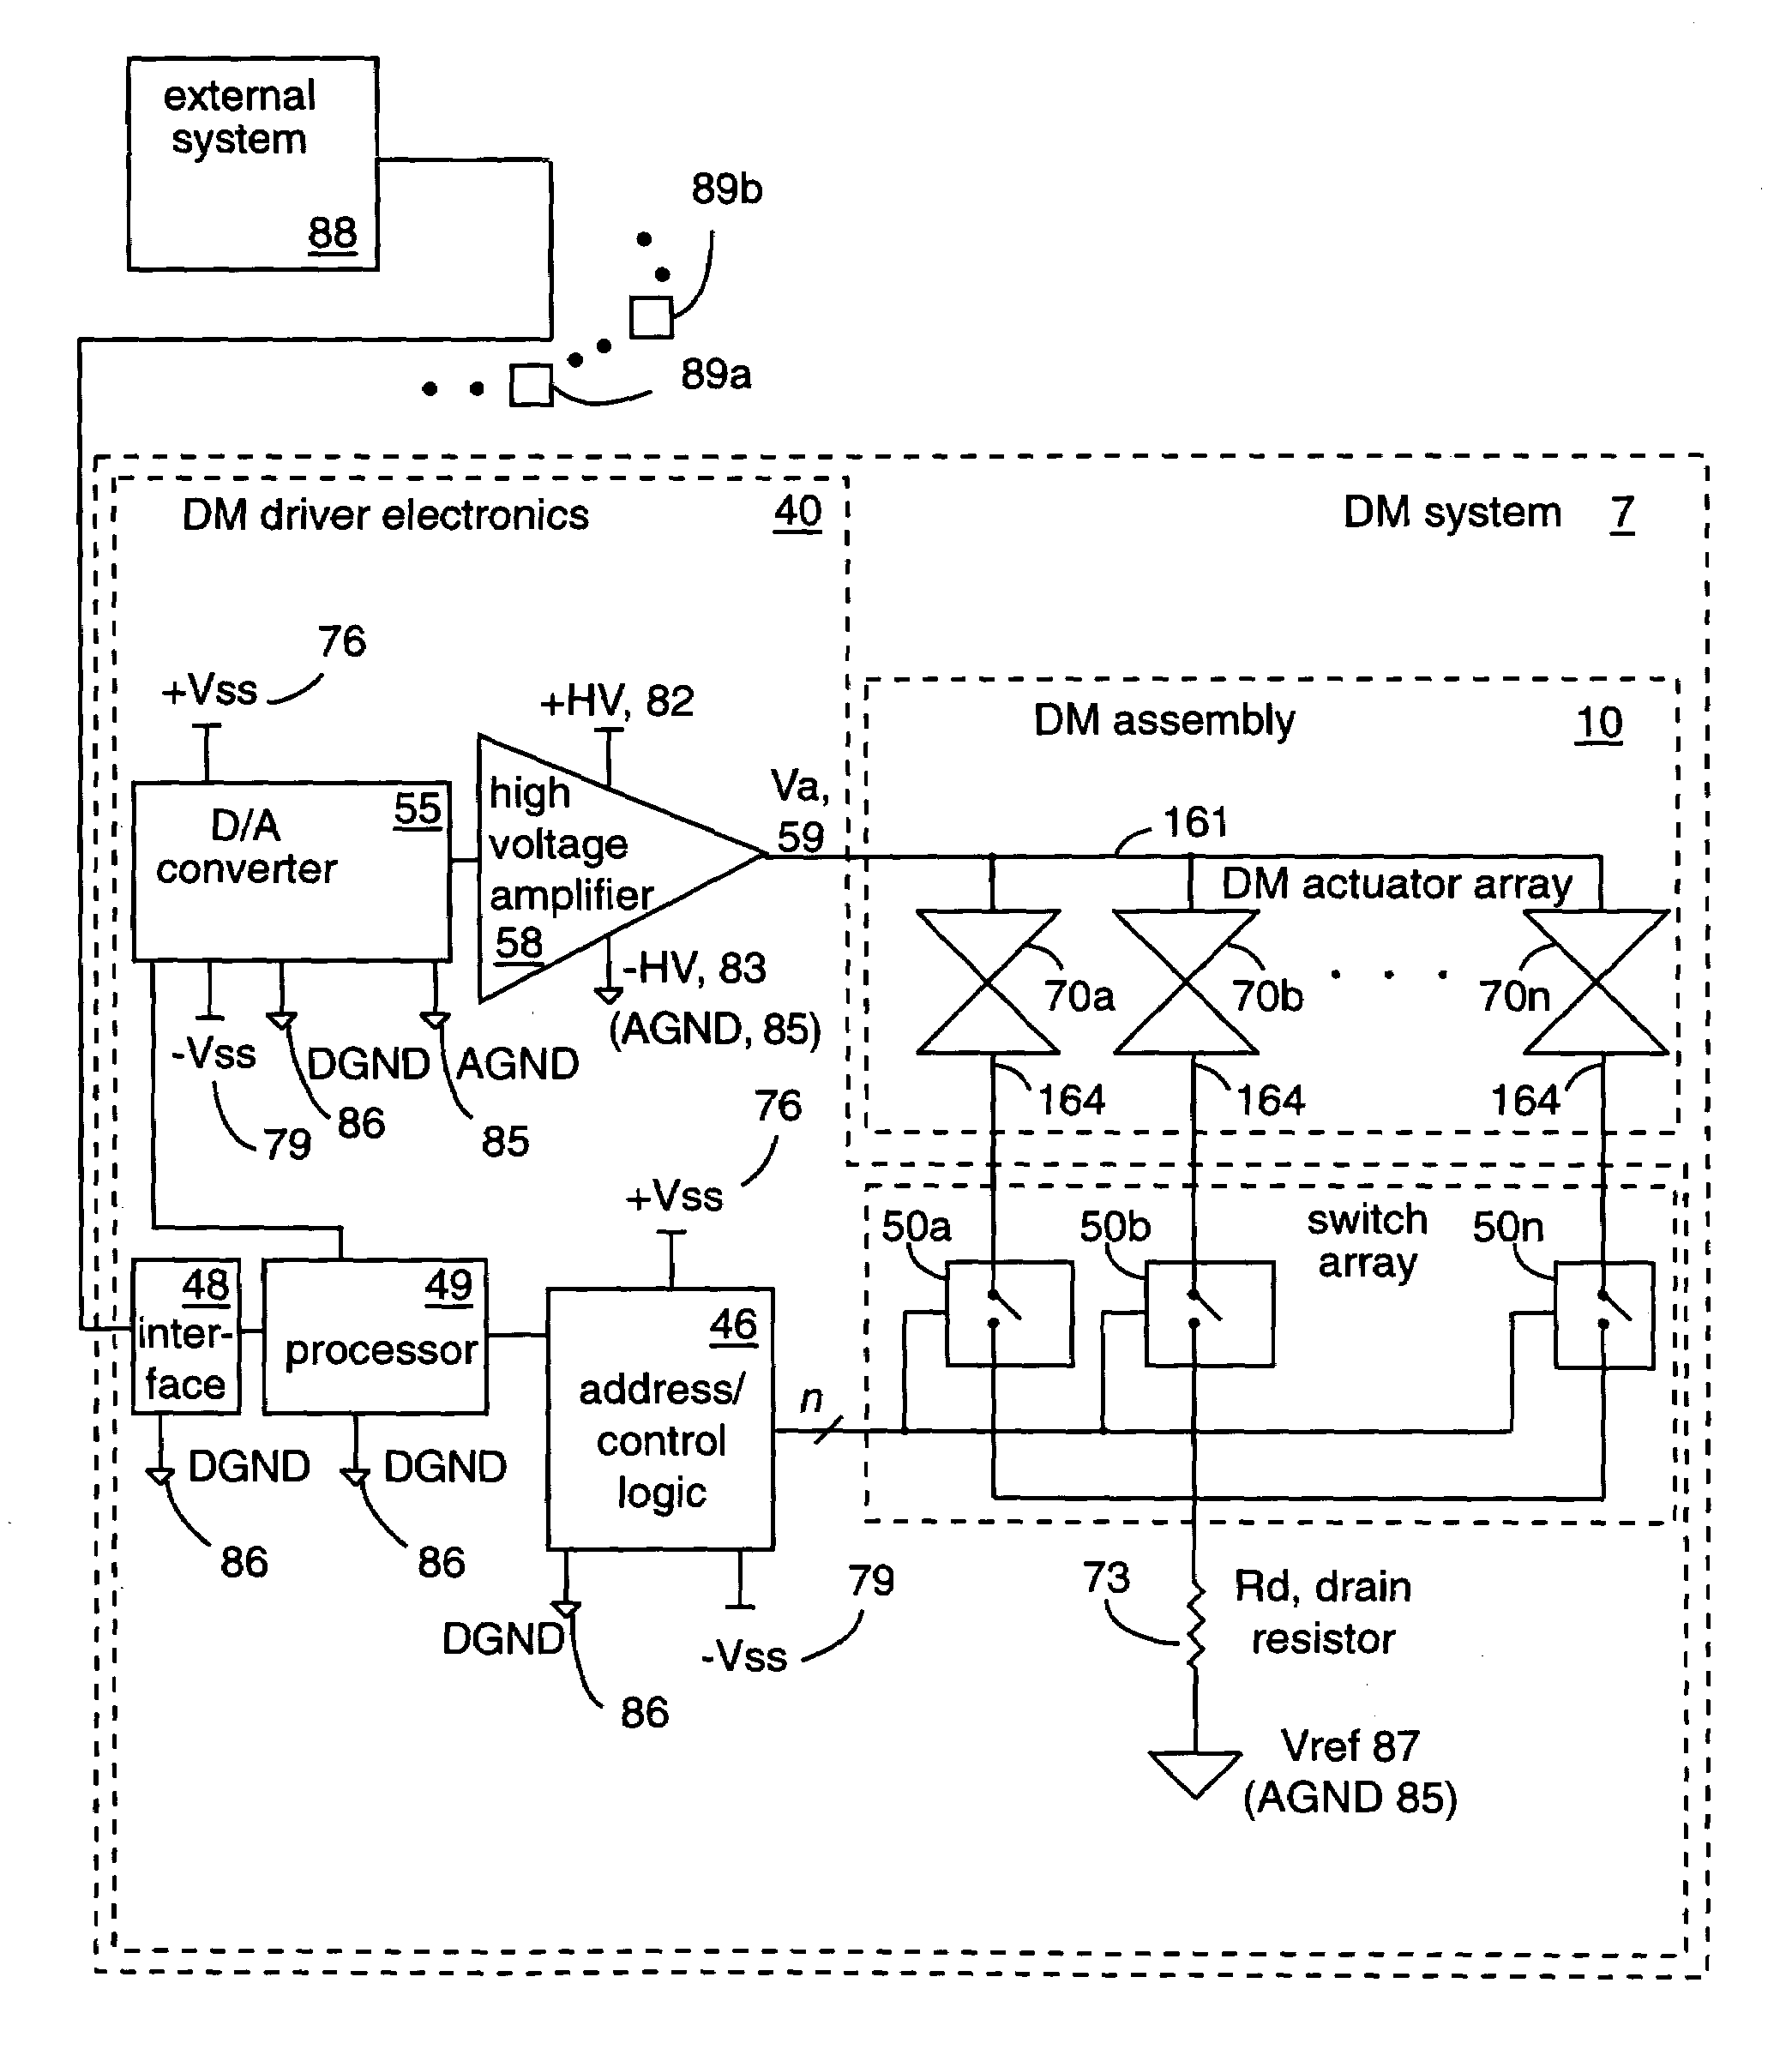 Multiplexer hardware and software for control of a deformable mirror